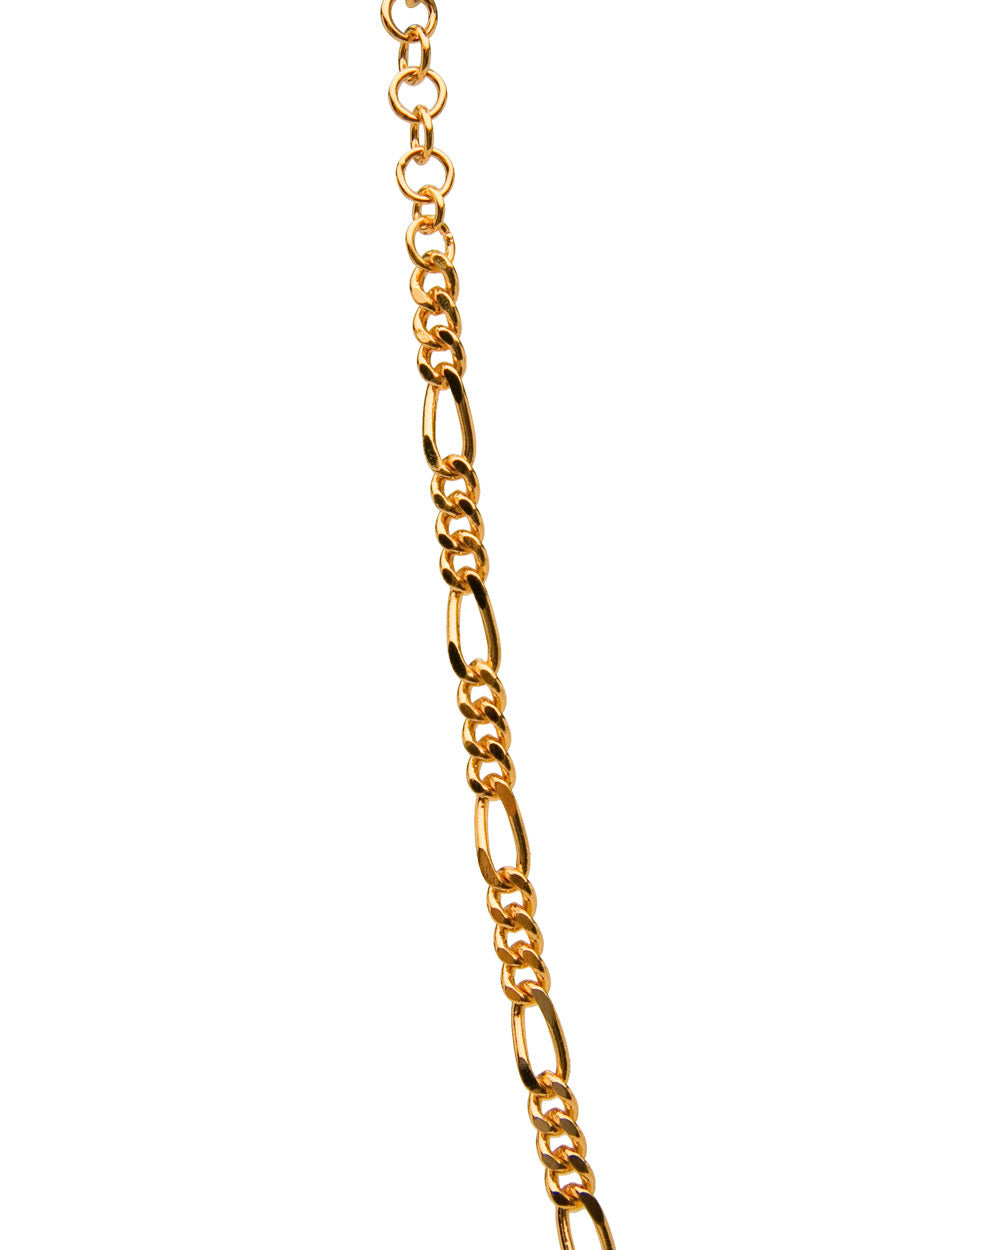 22k Gold Figaro Chain Necklace